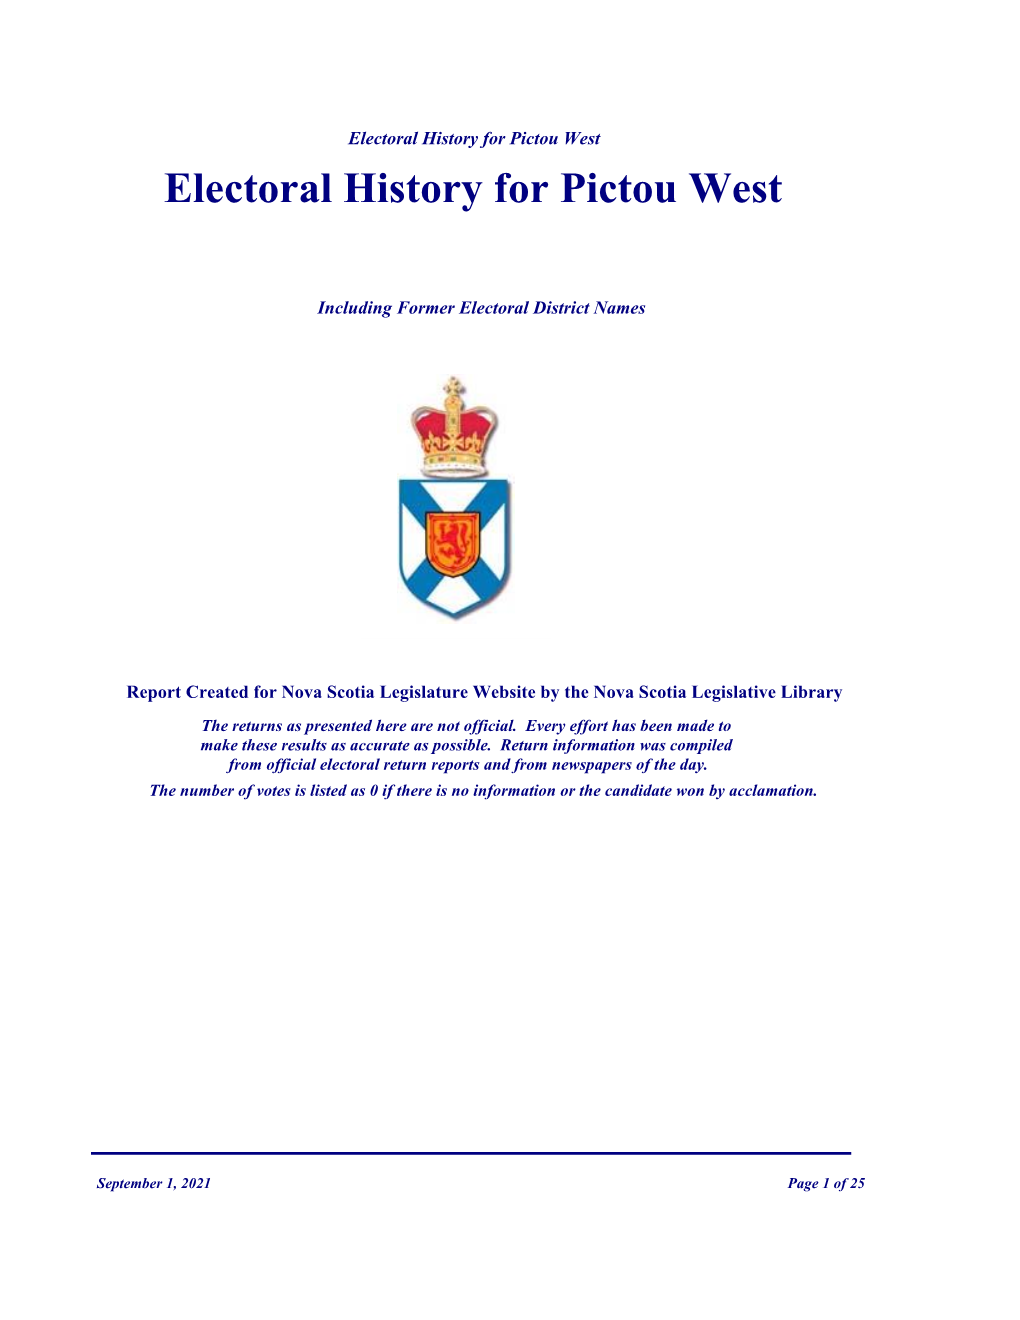 Electoral History for Pictou West Electoral History for Pictou West